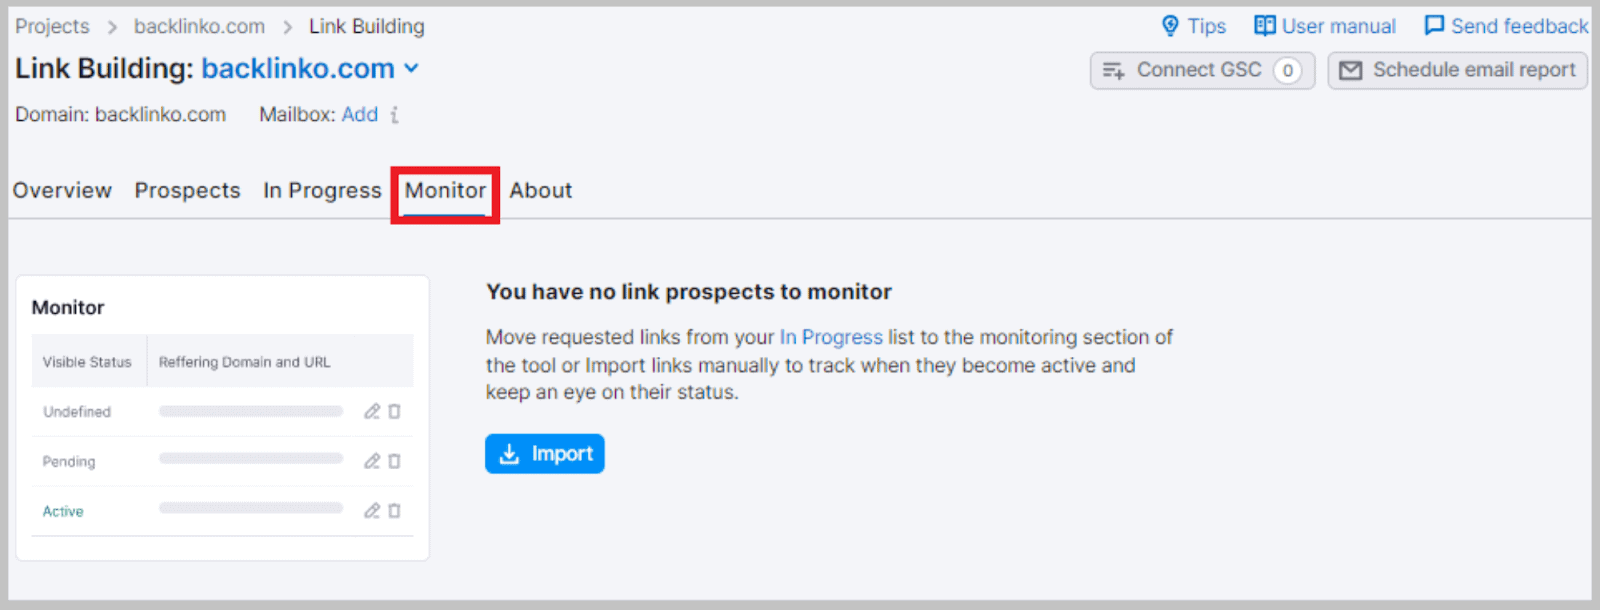 Monitor responses from backlinks prospects